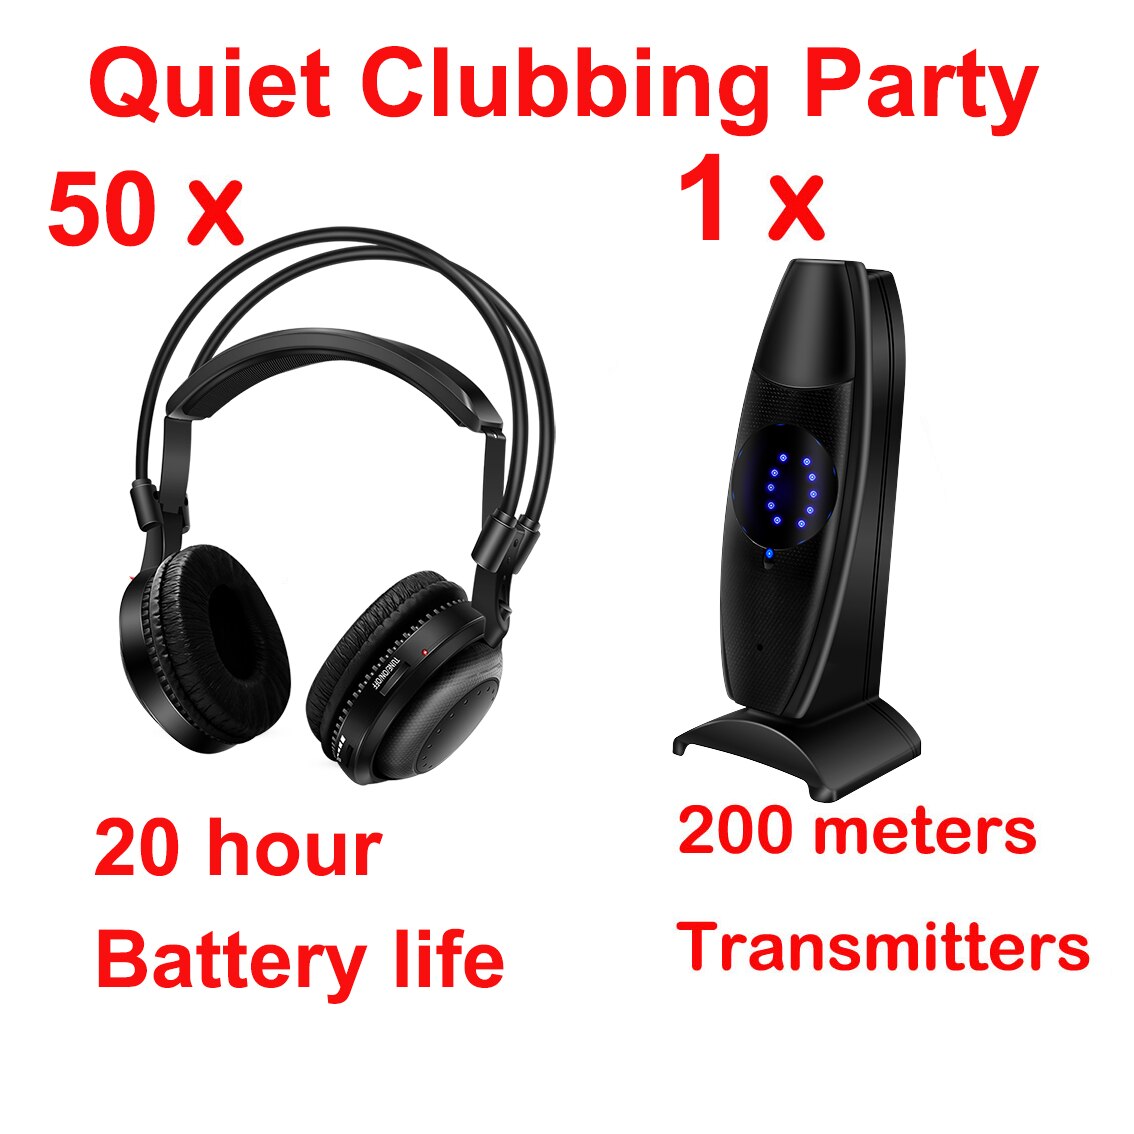 Typical Ultra low bass Silent Disco system wireless headphones - Quiet Clubbing Party Bundle (50 Headphones + 1 Transmitter)